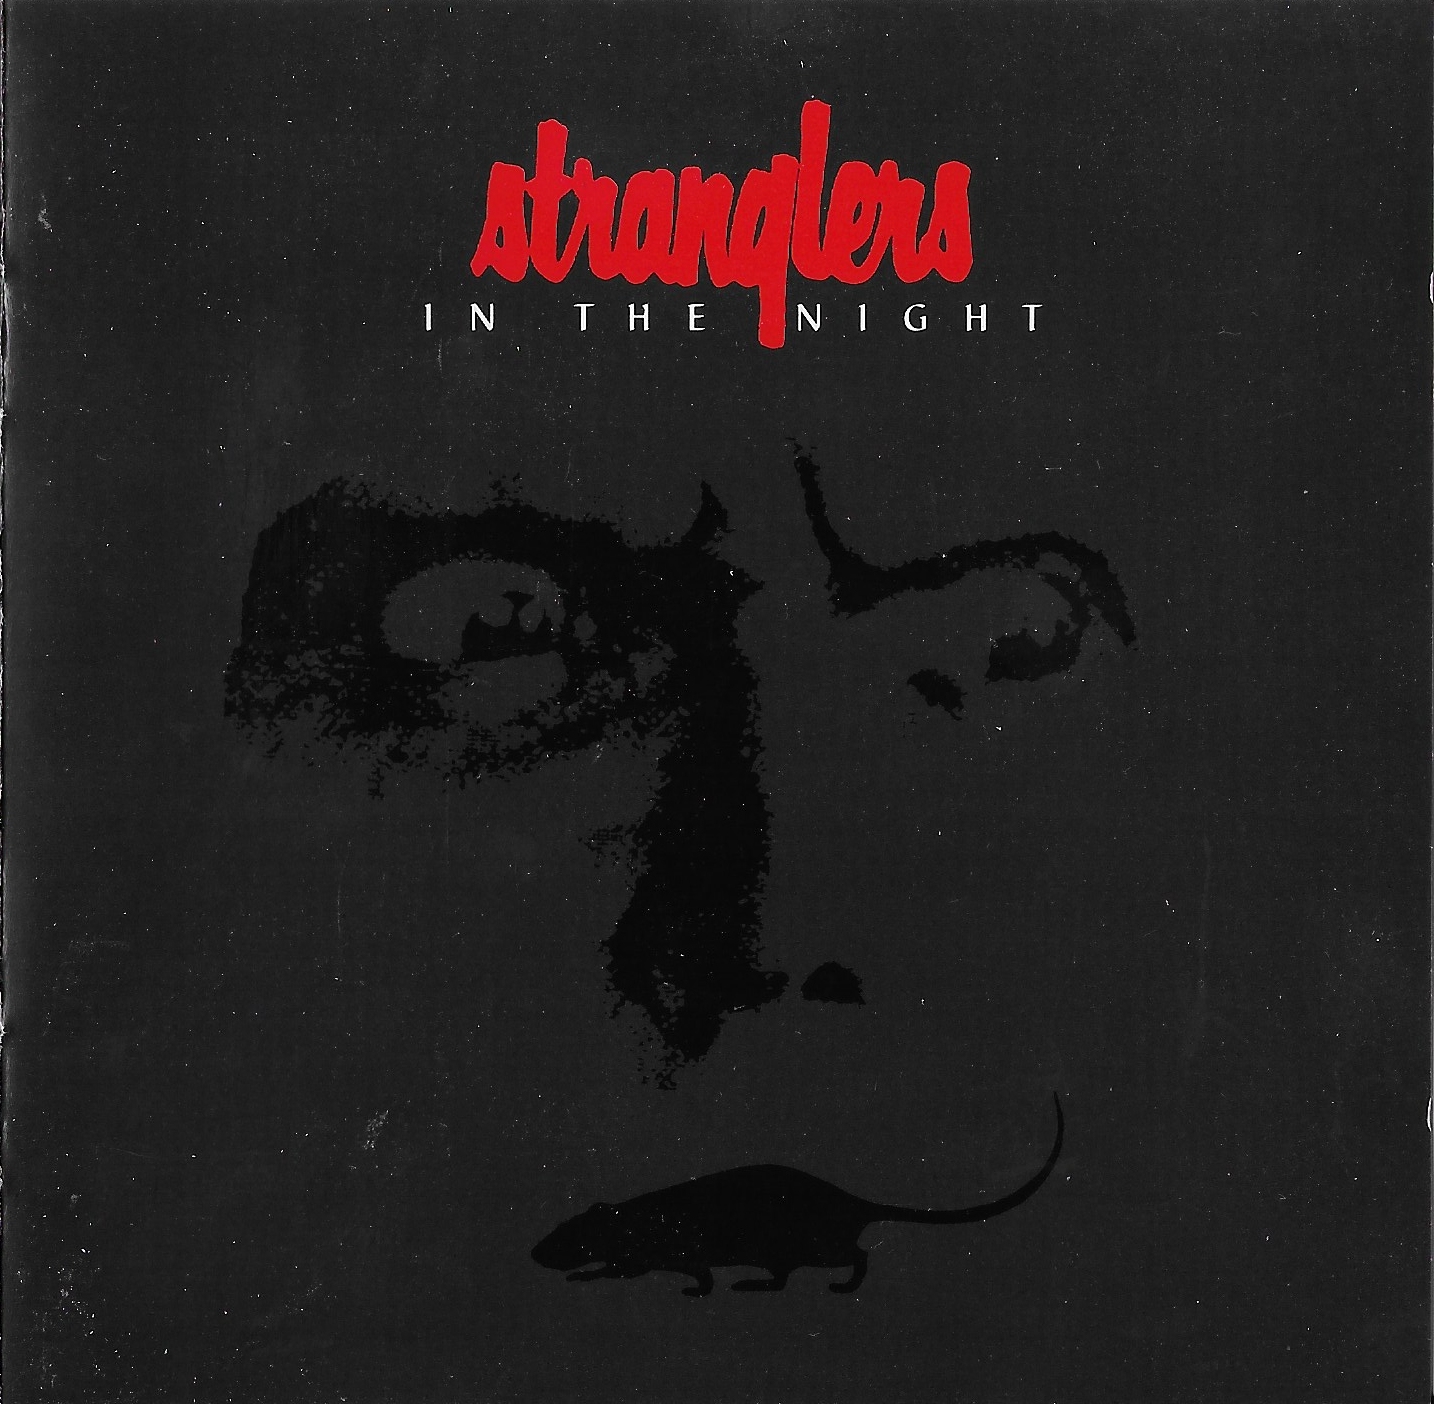 Picture of V 600385 Stranglers in the night by artist The Stranglers